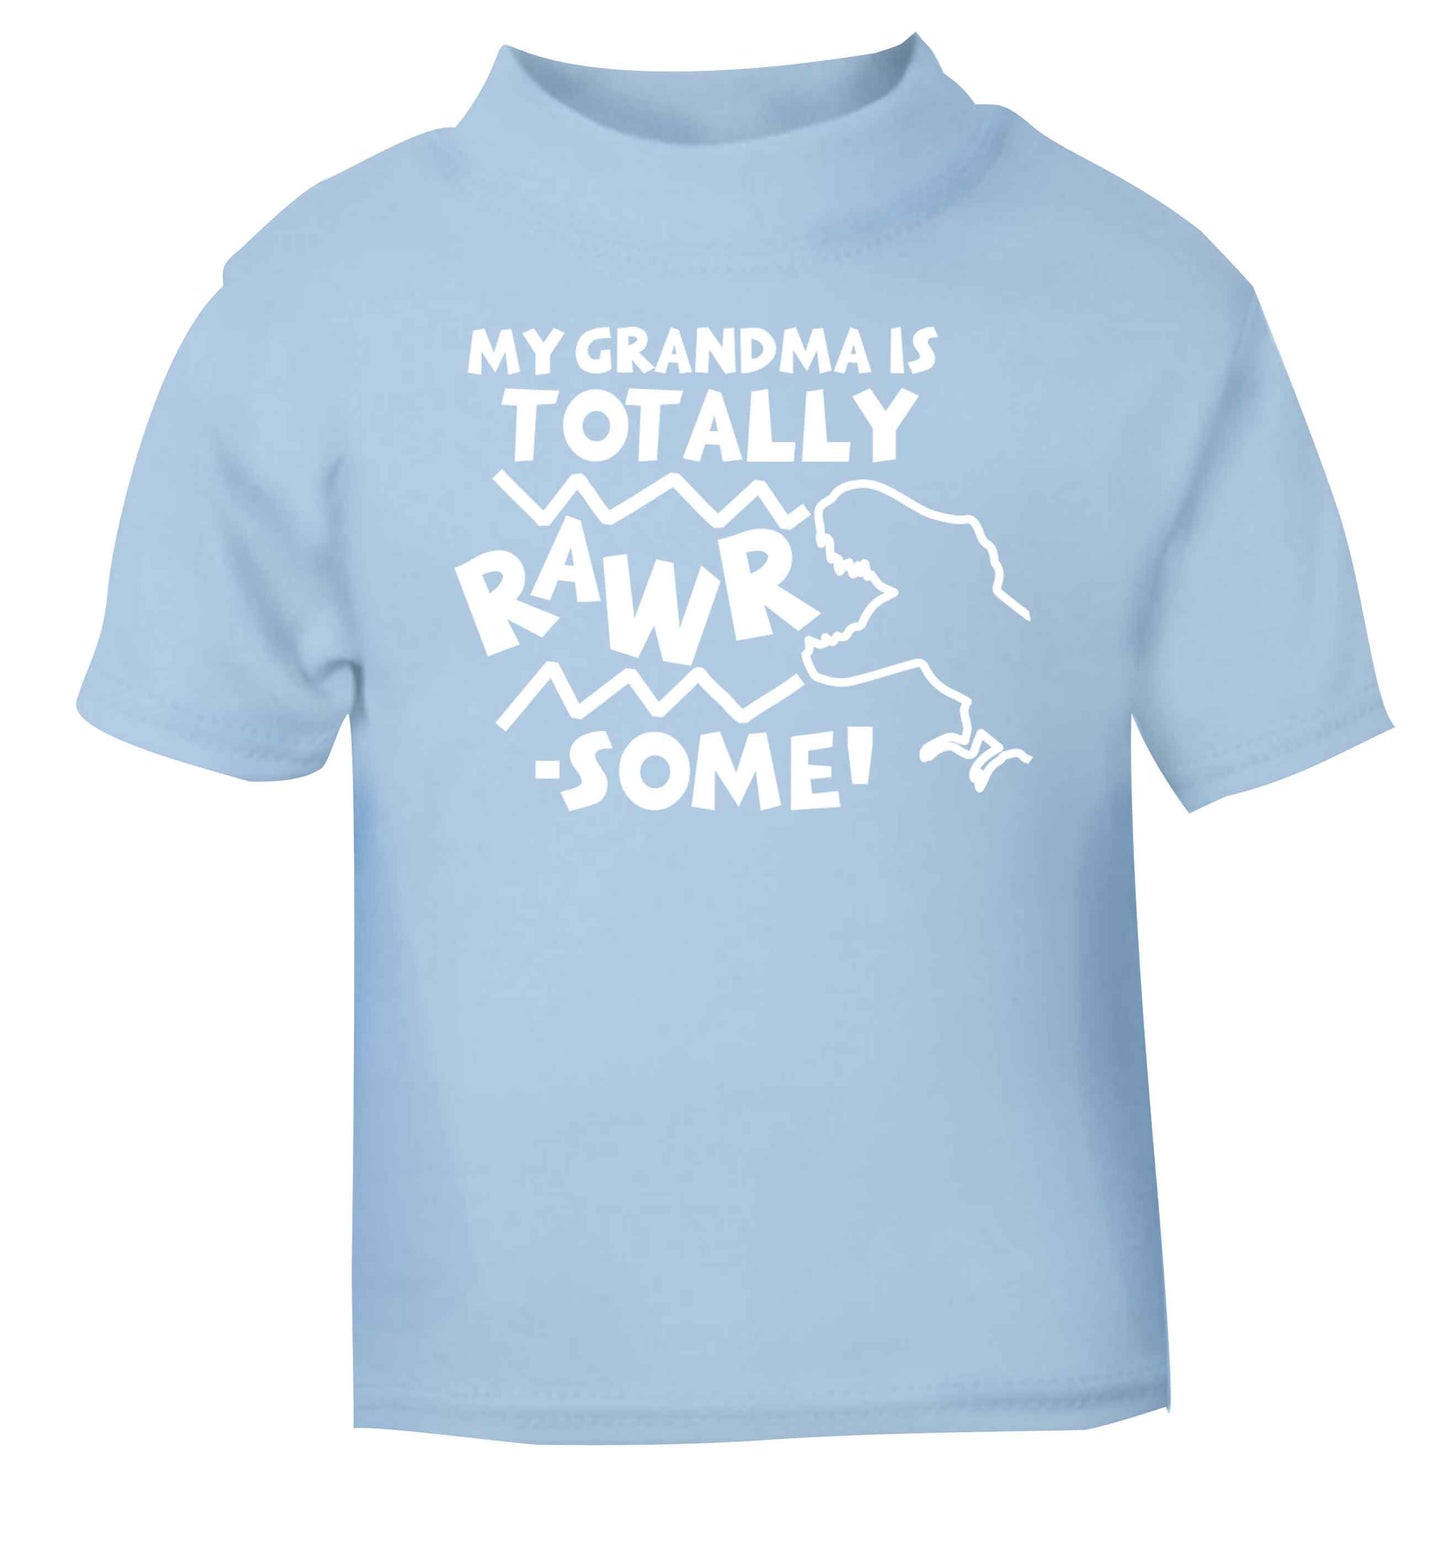 My grandma is totally rawrsome light blue baby toddler Tshirt 2 Years